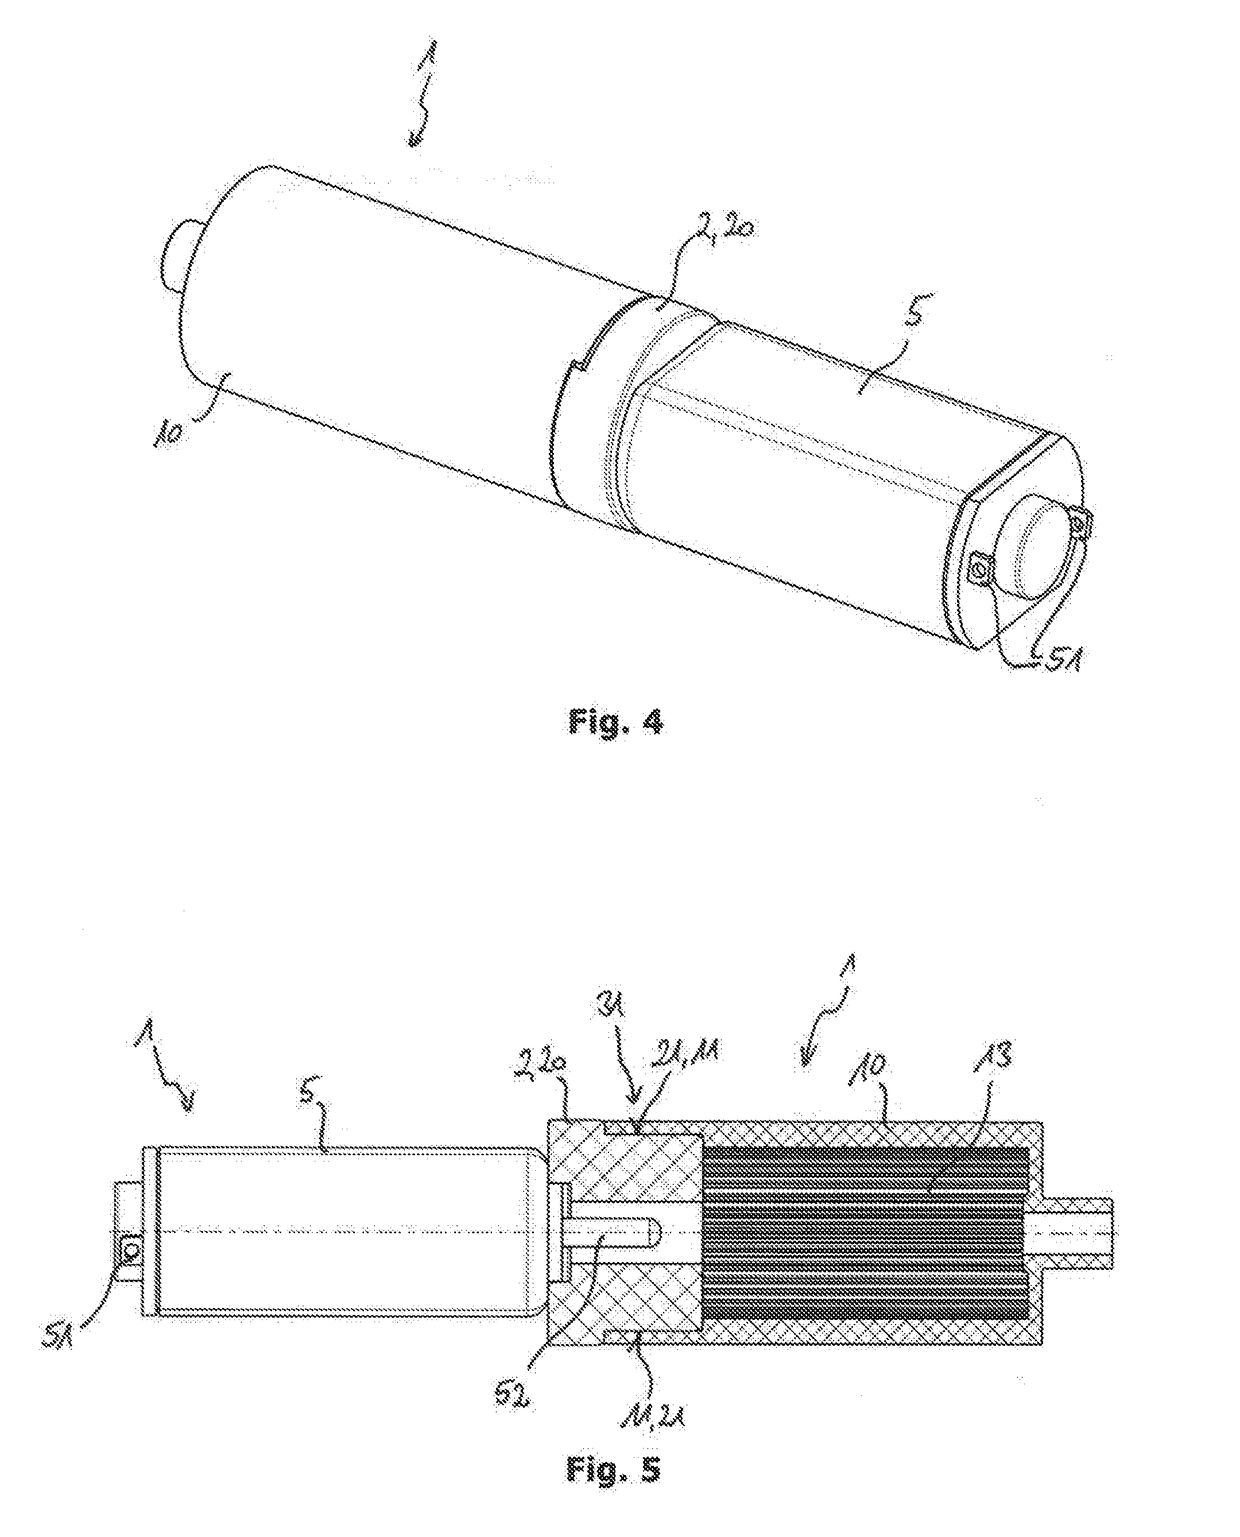 Gear housing especially for an epicyclic gear set and method of making same